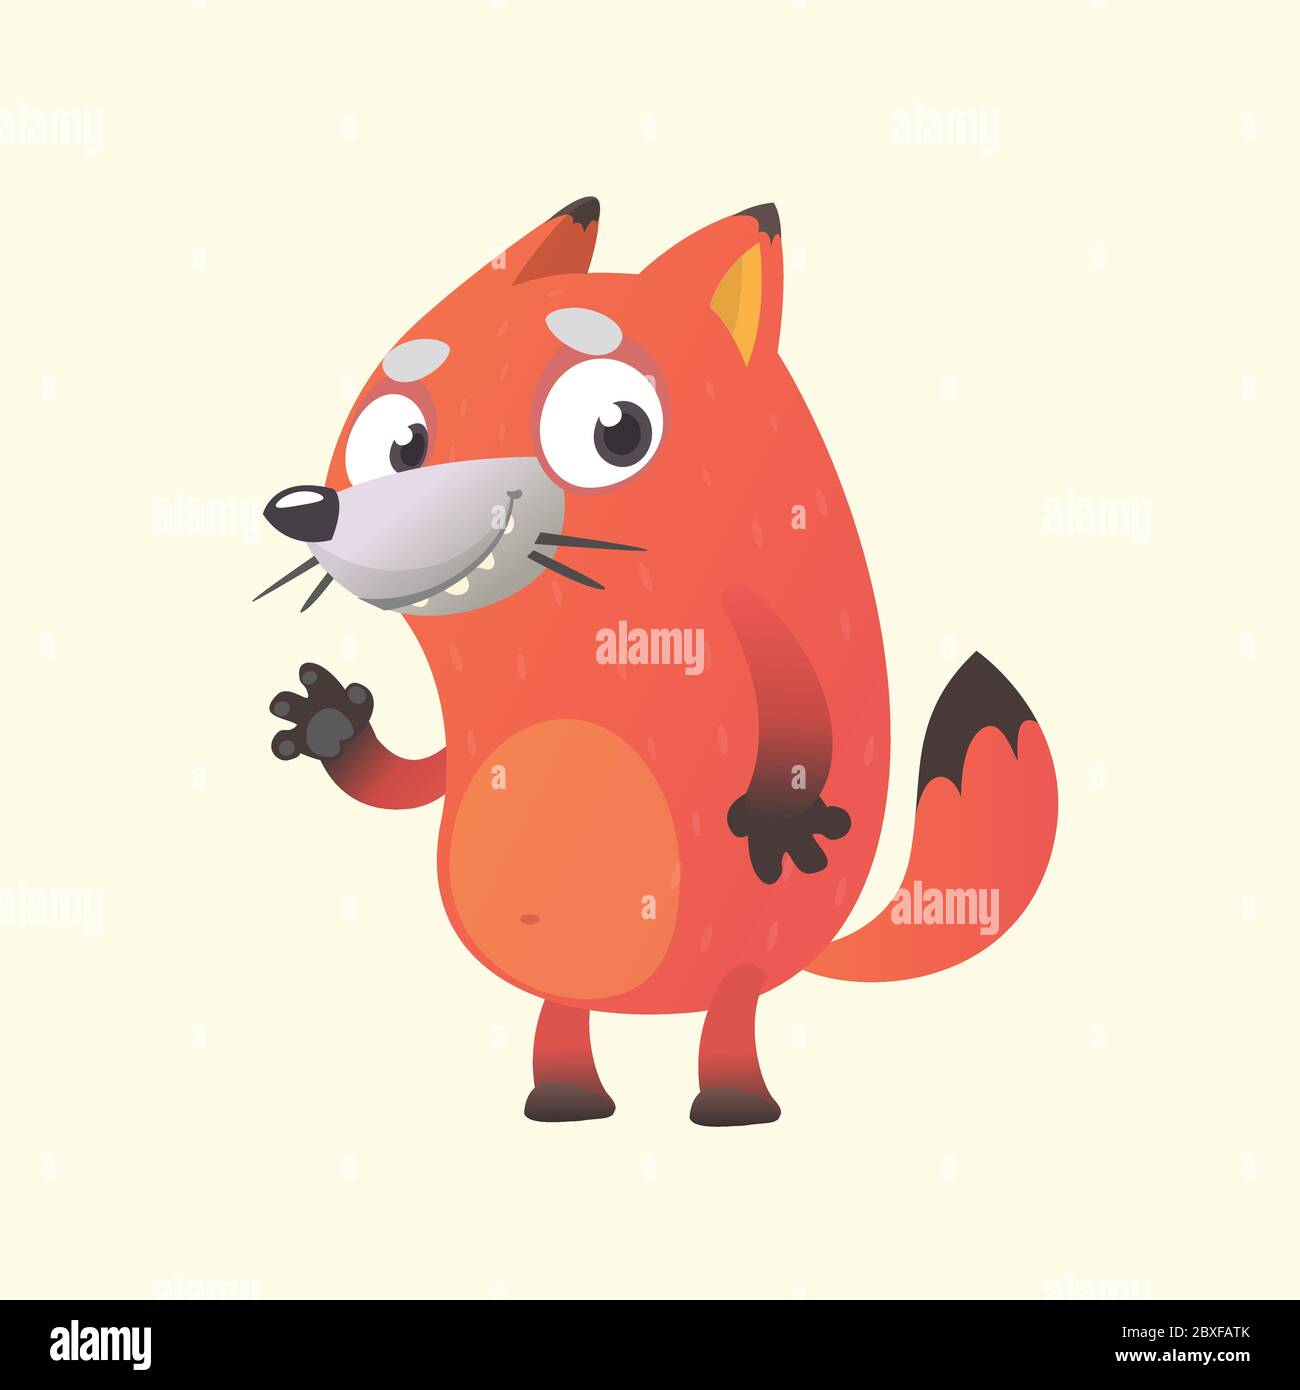 Cute cartoon fox mascot character. Vector illustration of an orange fox waving hand. Isolated on white. Character for children books, sticker, print o Stock Vector